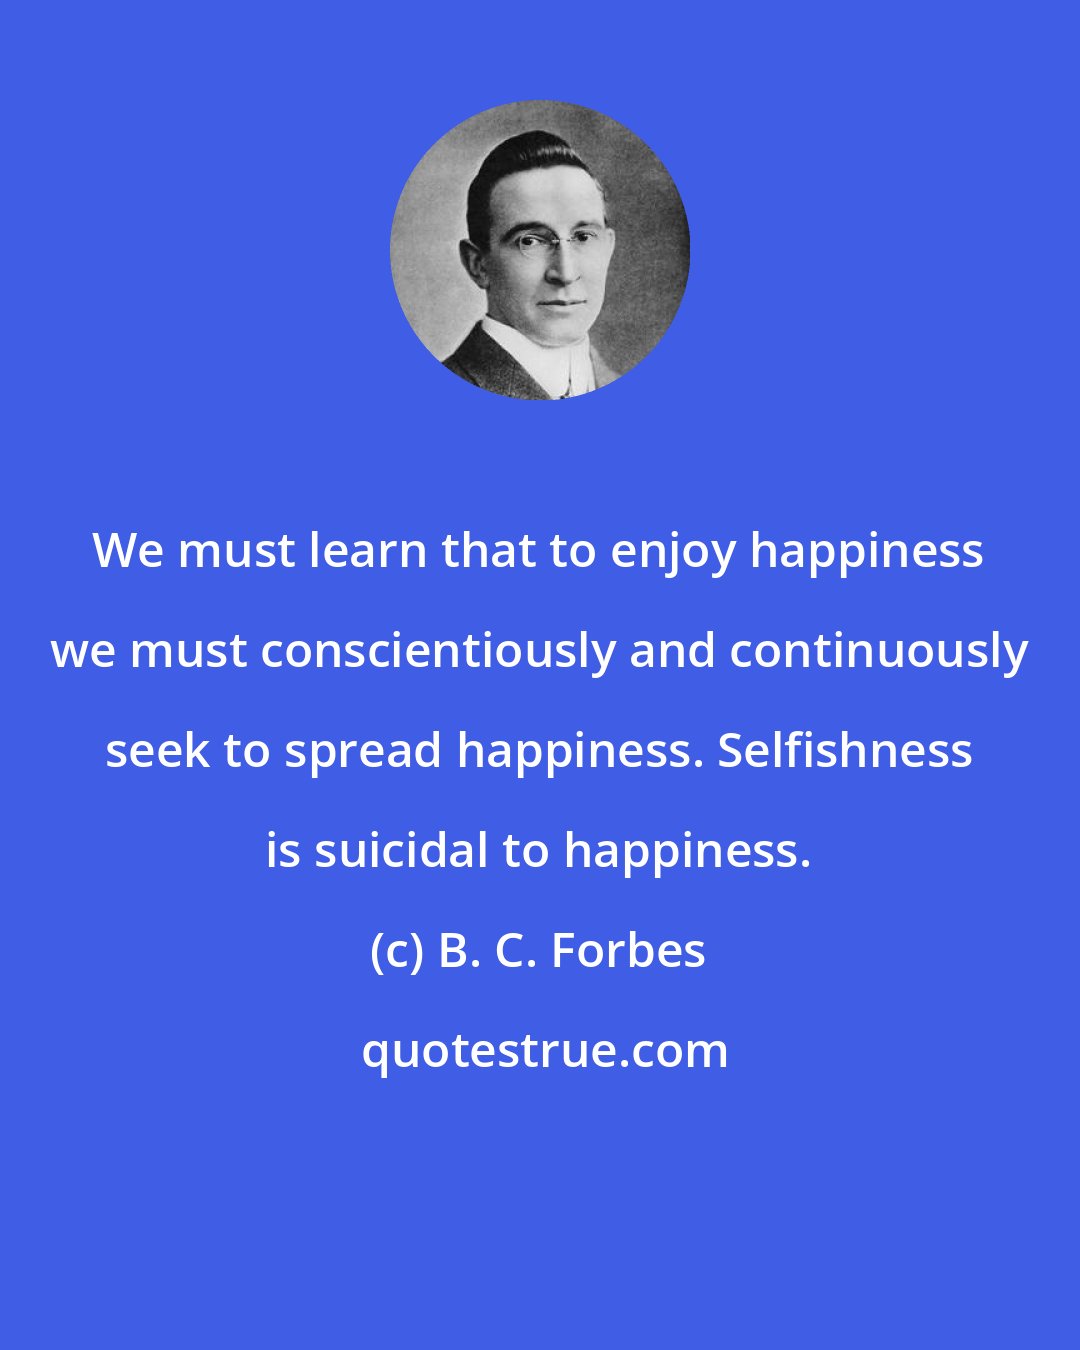 B. C. Forbes: We must learn that to enjoy happiness we must conscientiously and continuously seek to spread happiness. Selfishness is suicidal to happiness.